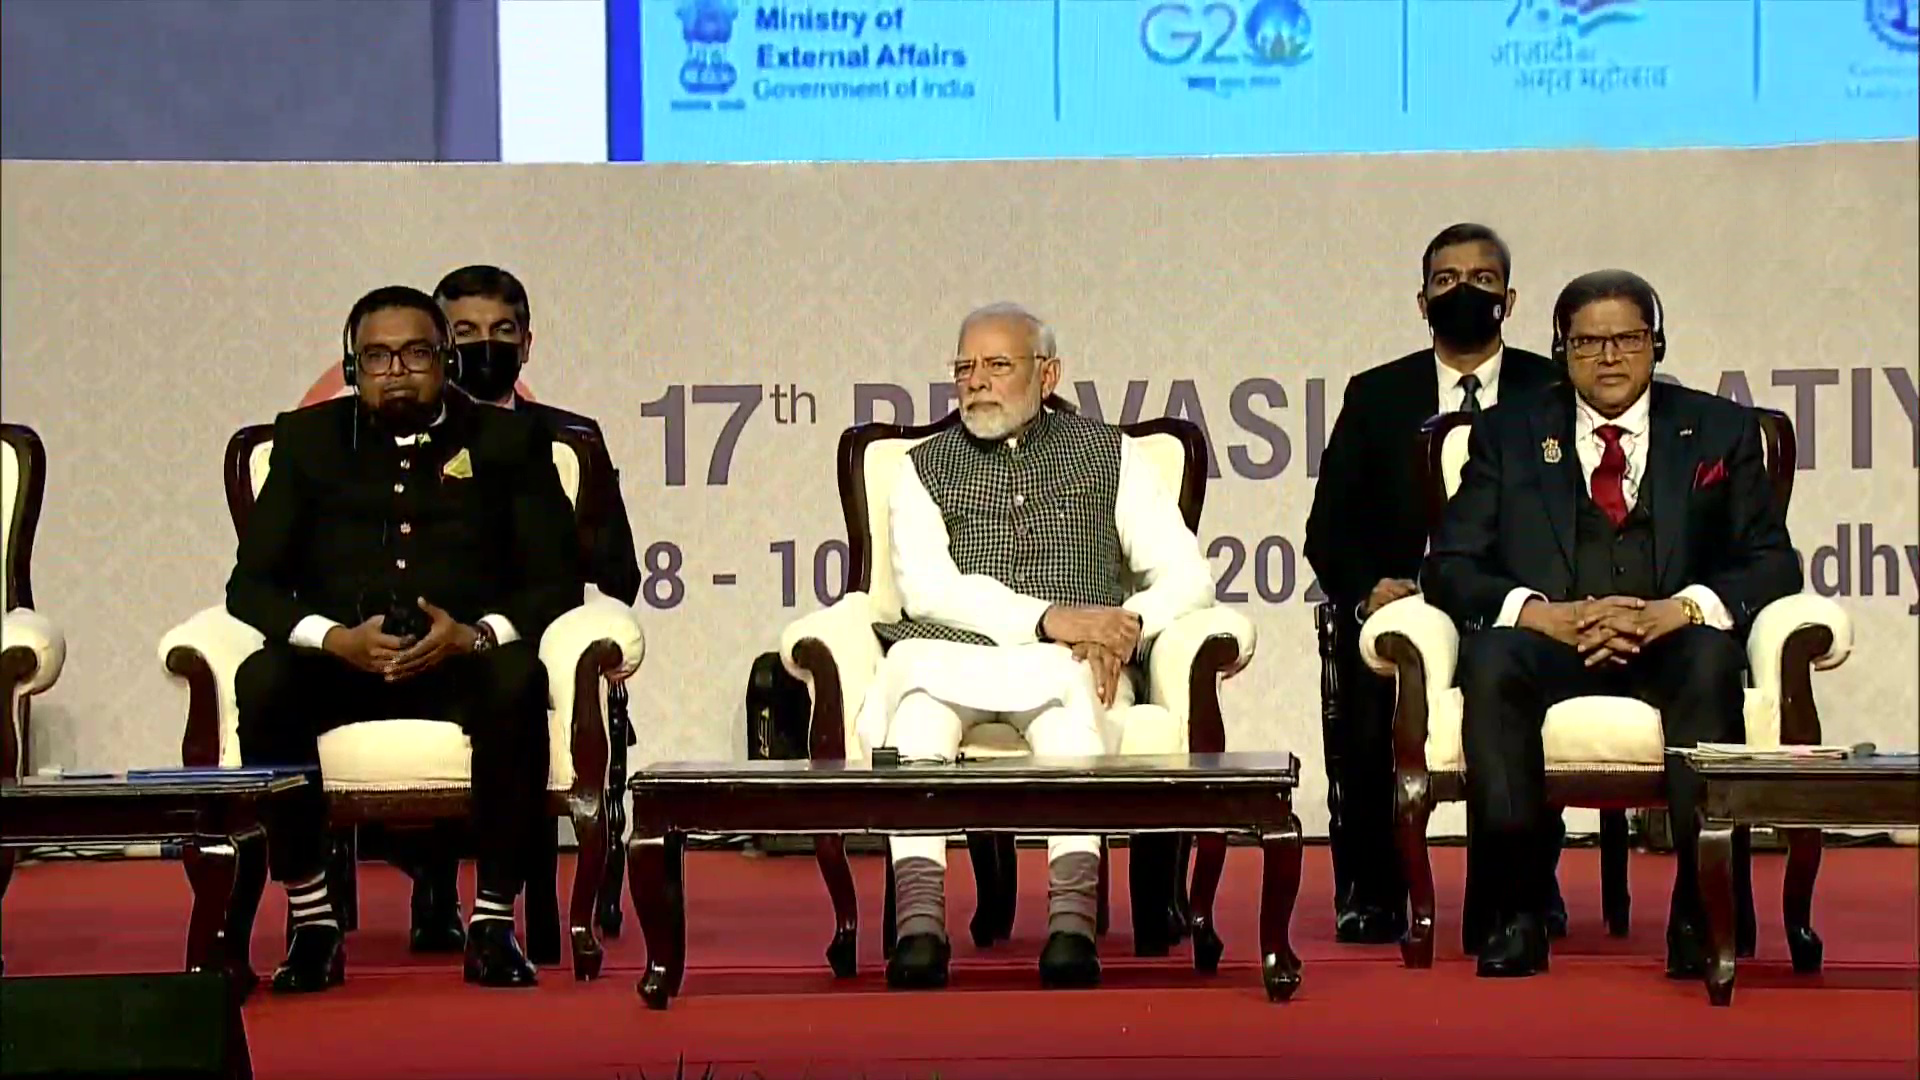 G20 events across different states capture the imagination and interest of the public. From Gujarat to West Bengal and Madhya Pradesh to Kerala, G20 in its various forms reached out to the people